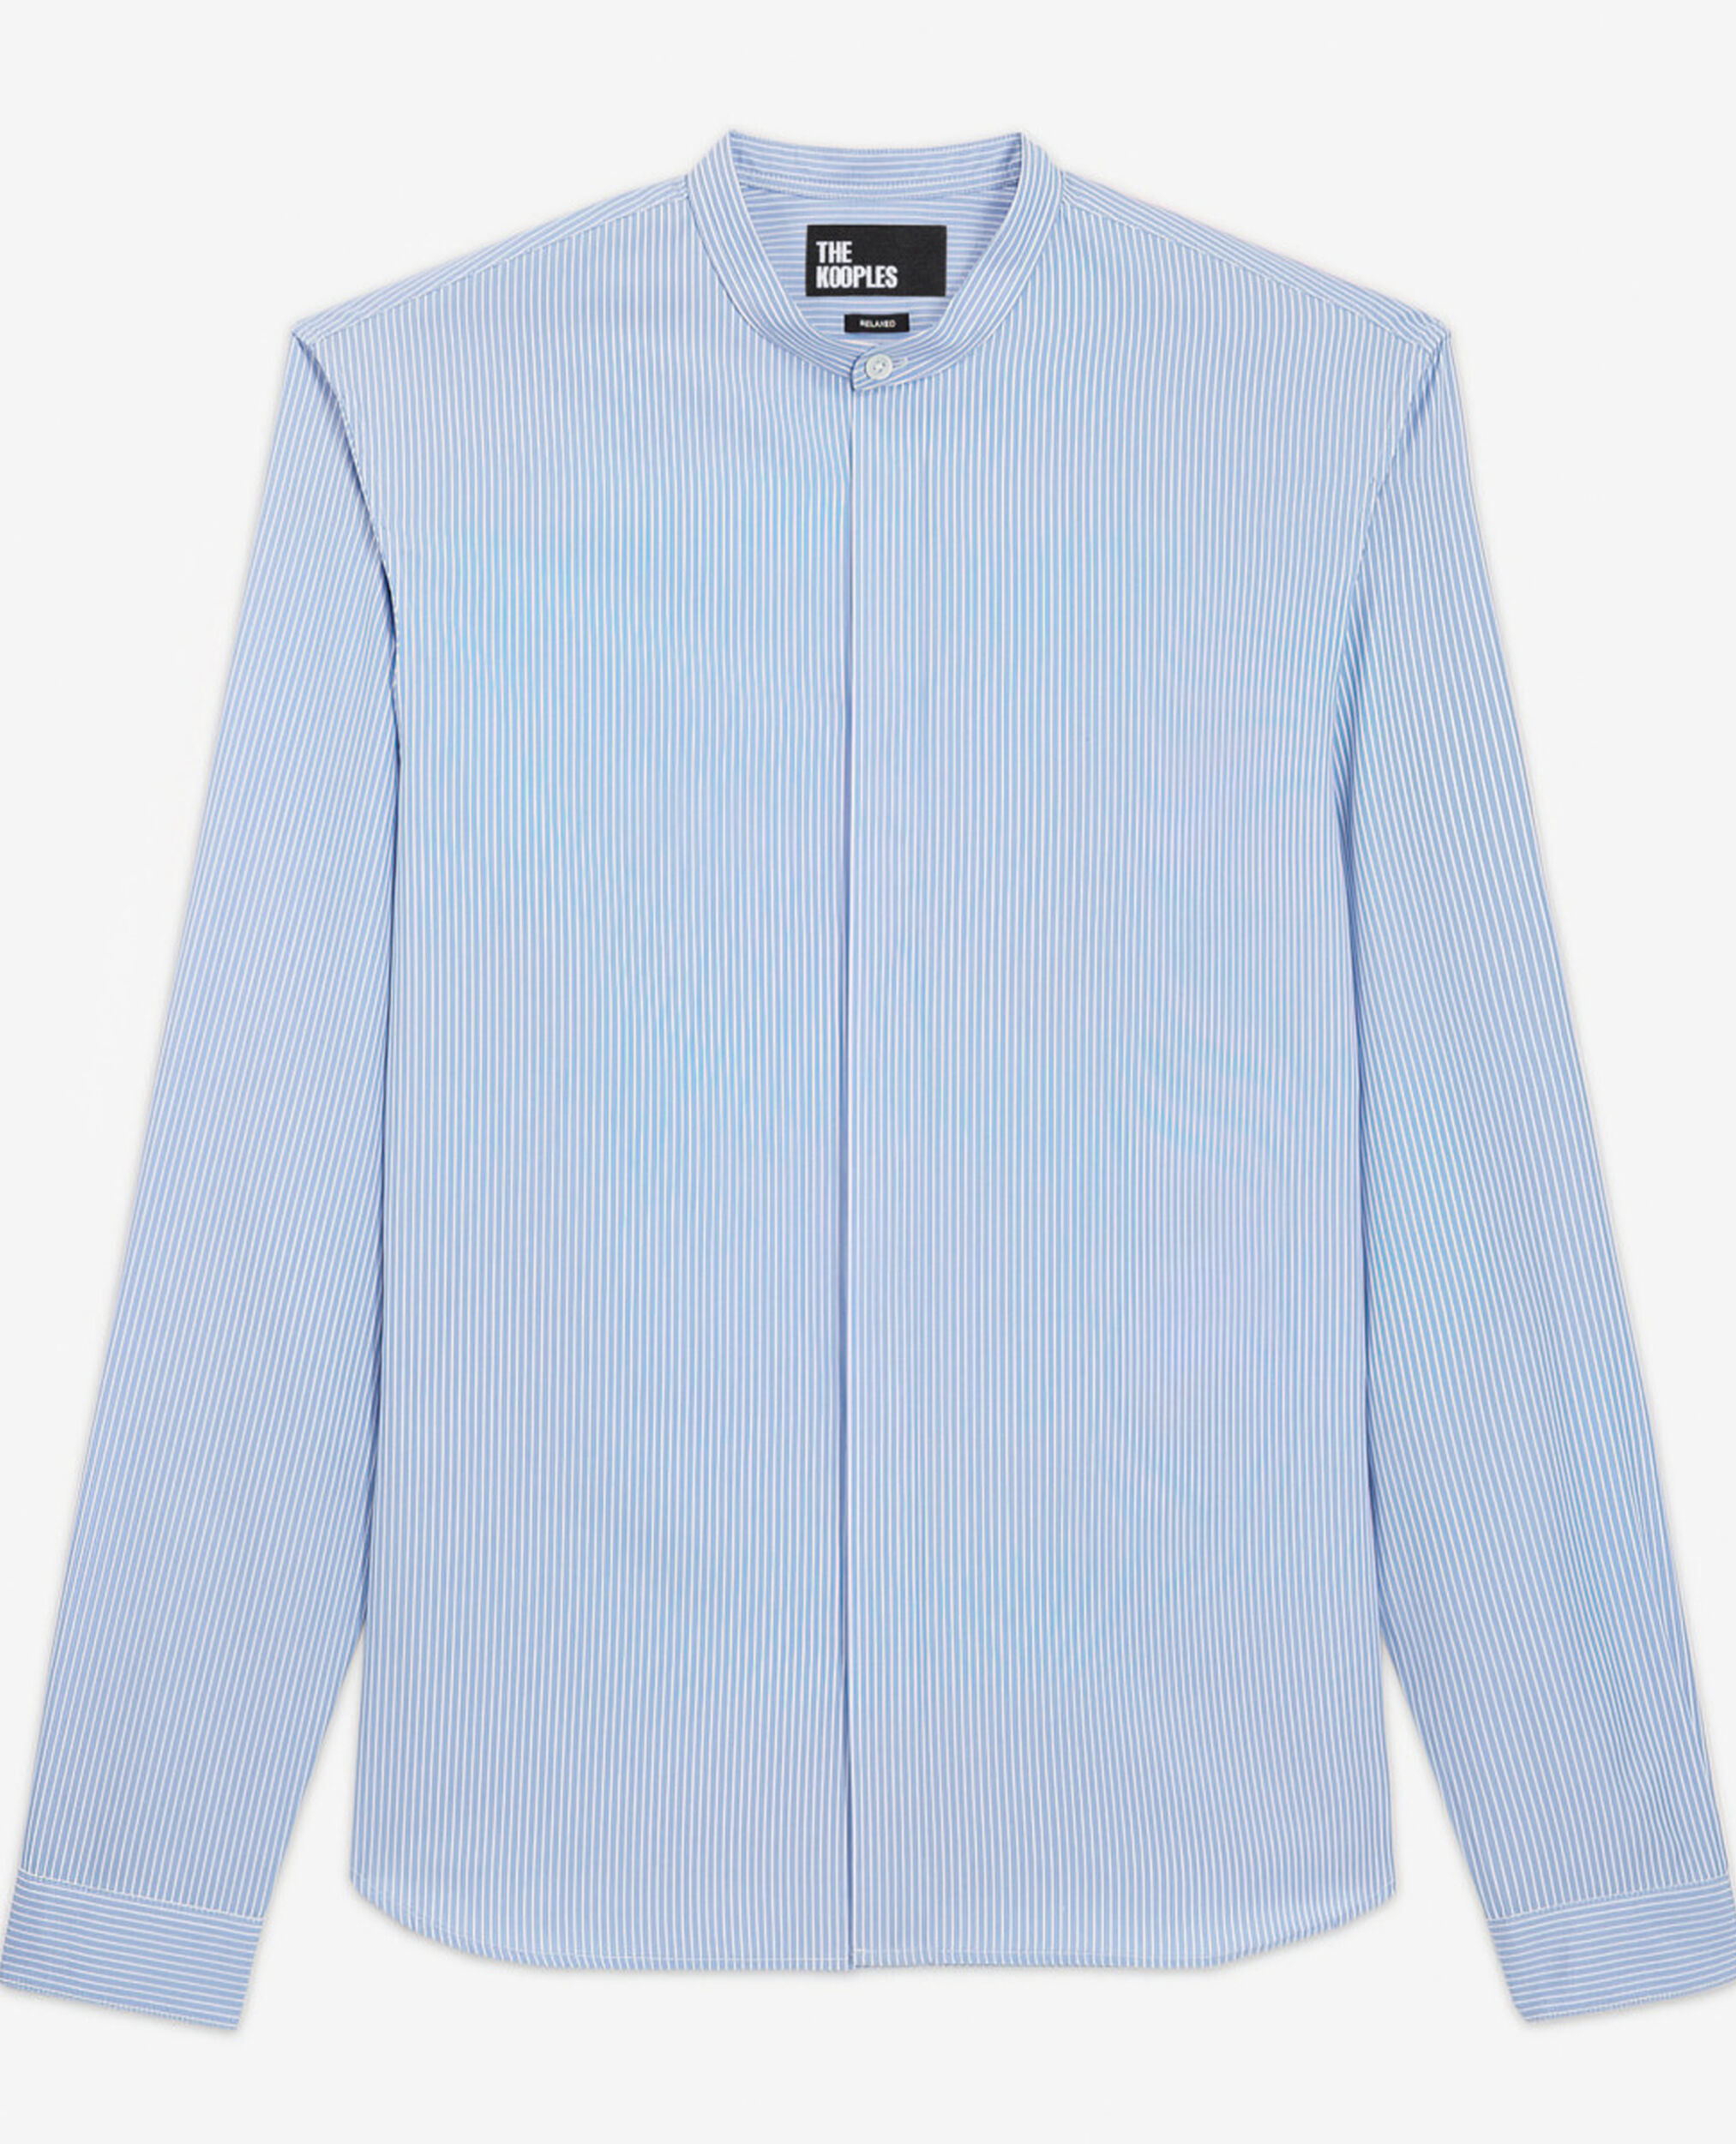 Blue striped shirt with Mao-neck, WHITE / SKY BLUE, hi-res image number null